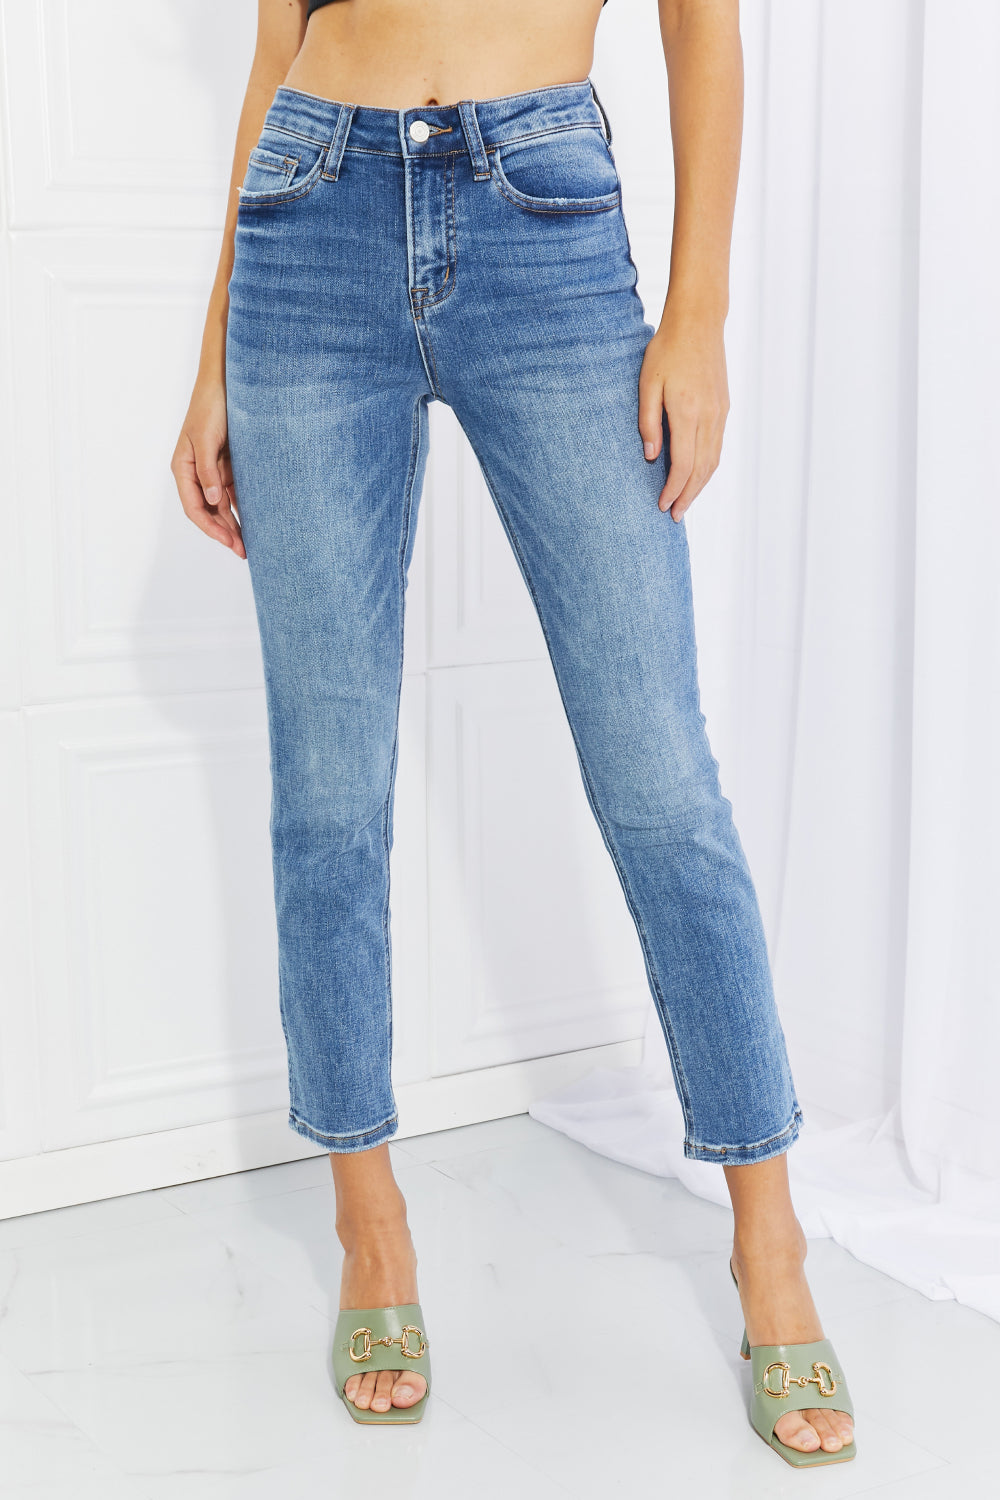 Lovervet Talk About It Full Size Cropped Jeans | - CHANELIA